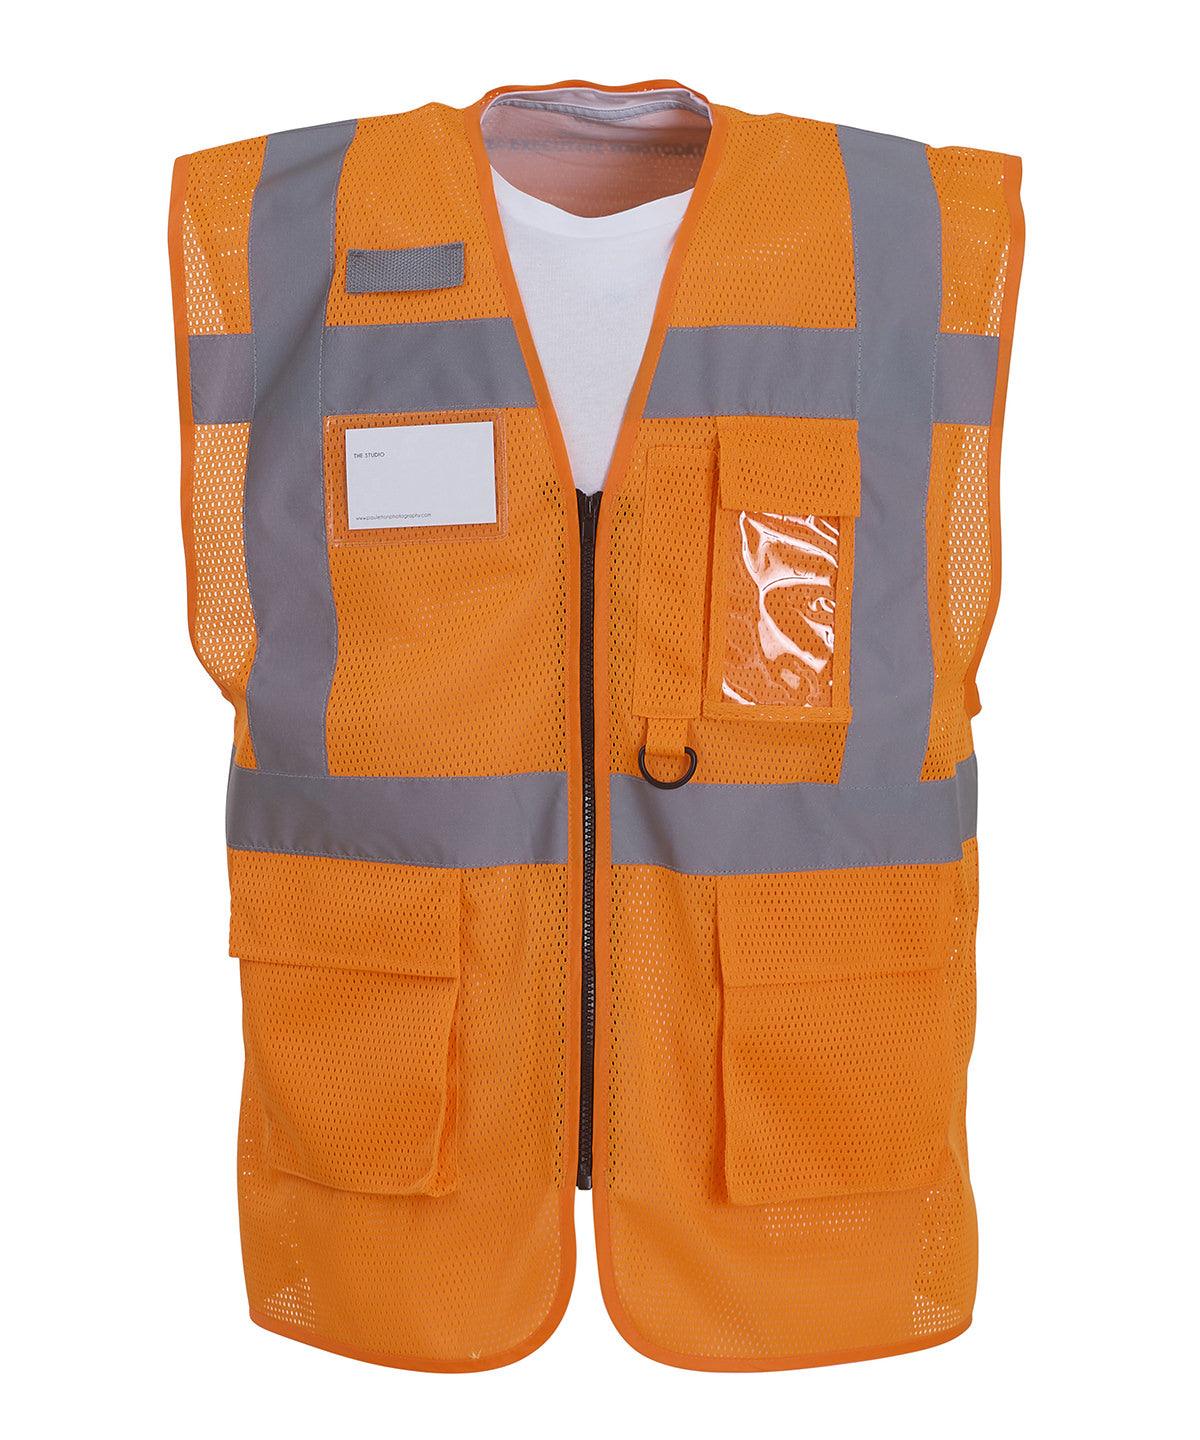 Orange - Hi-vis top cool open-mesh executive waistcoat (HVW820) Safety Vests Yoko Plus Sizes, Raladeal - Recently Added, Safety Essentials, Safetywear, Workwear Schoolwear Centres